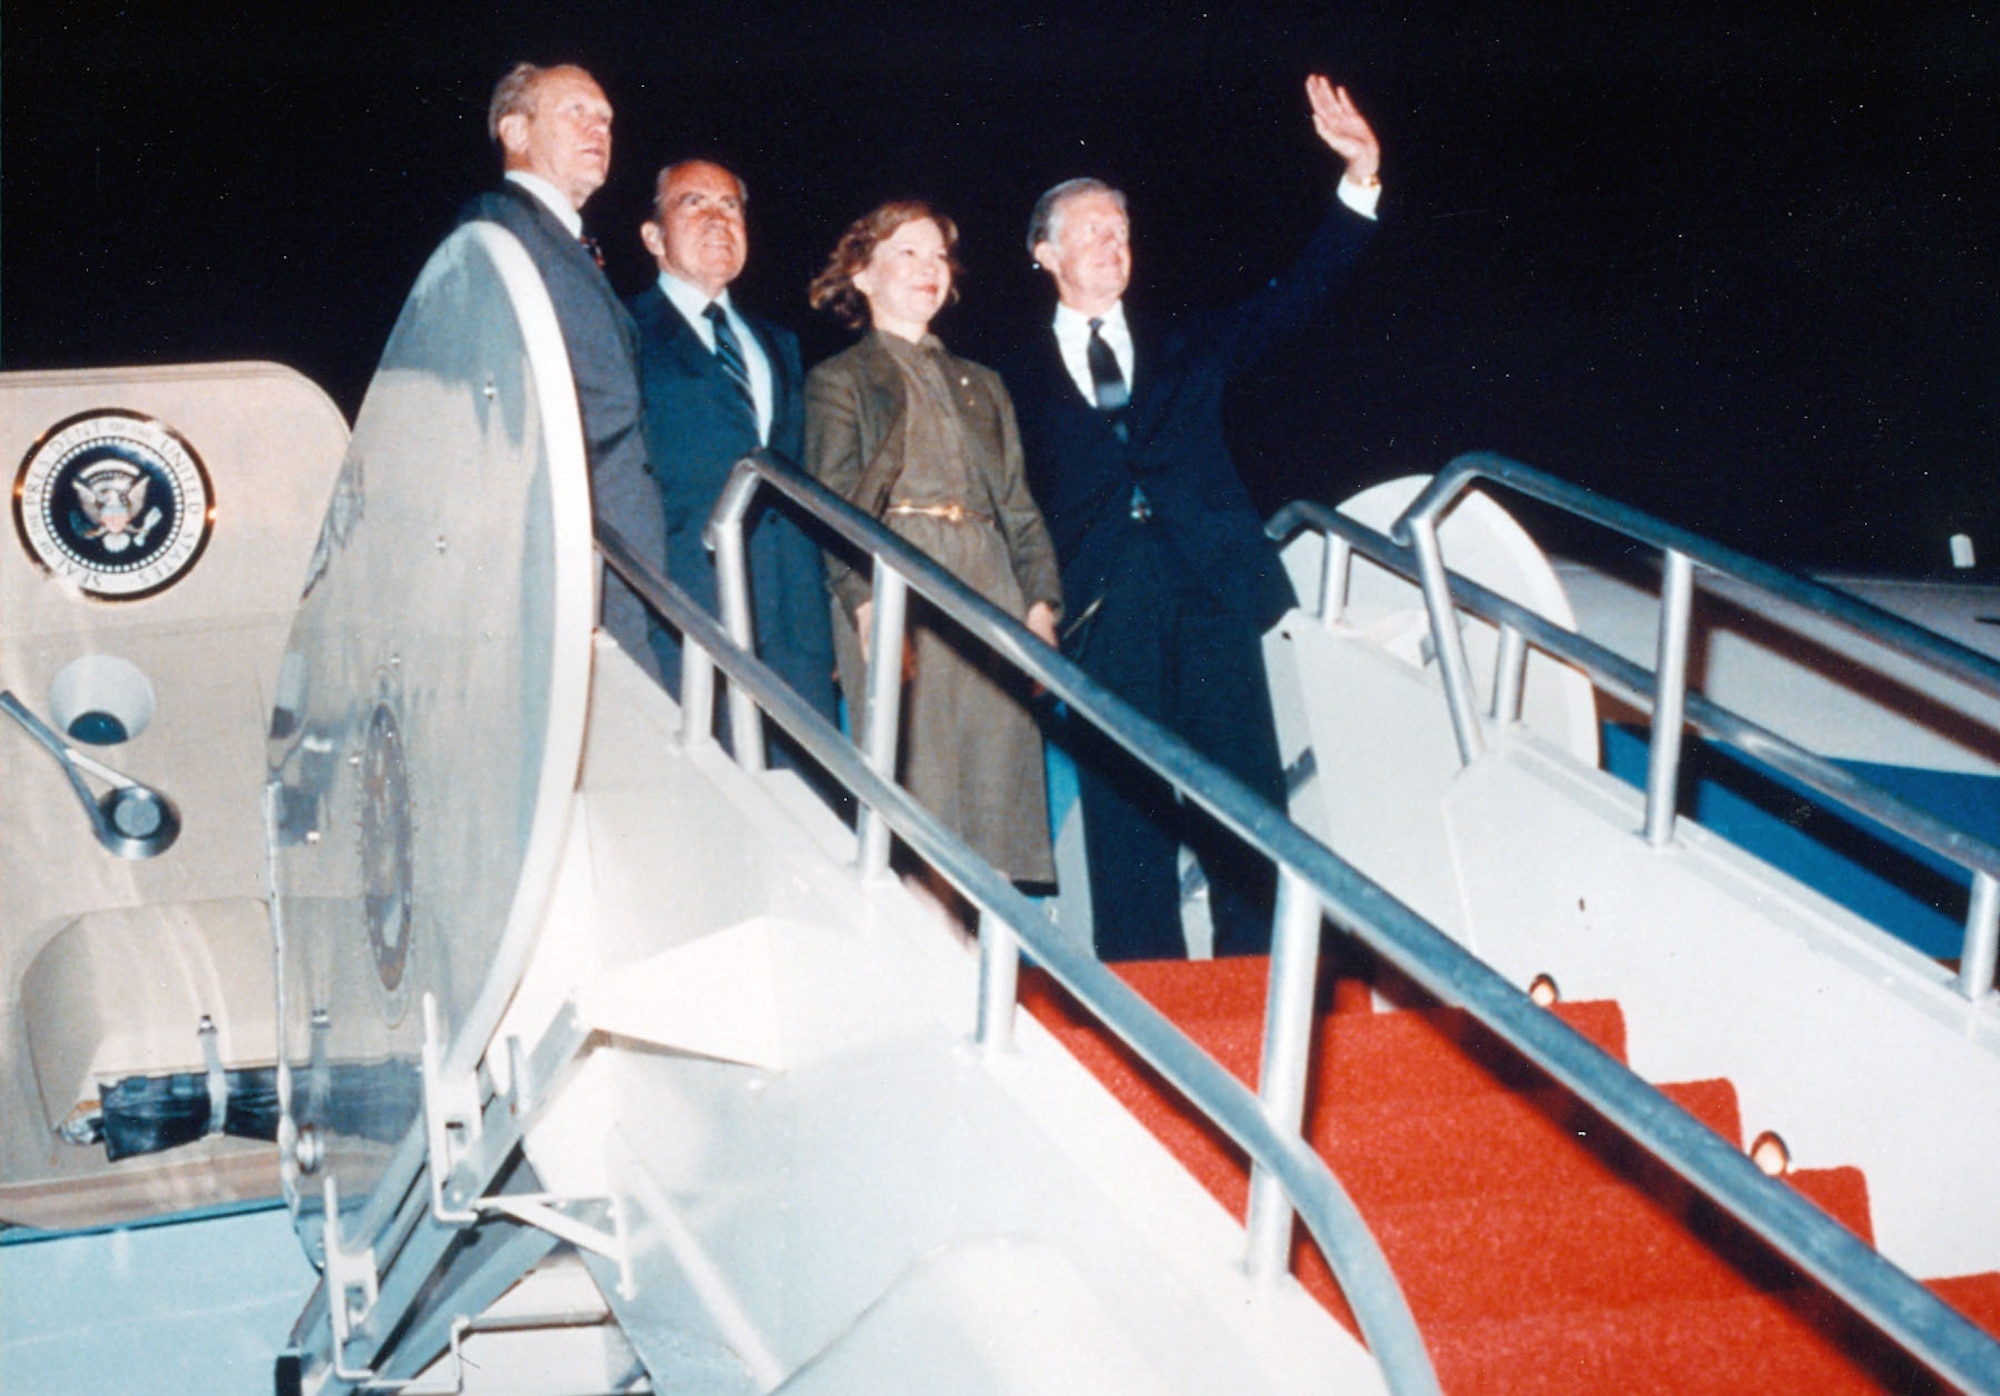 Former Presidents Gerald Ford, Richard Nixon and Jimmy Carter on the steps of Boeing VC-137C SAM 26000 (Air Force One). (U.S. Air Force photo)